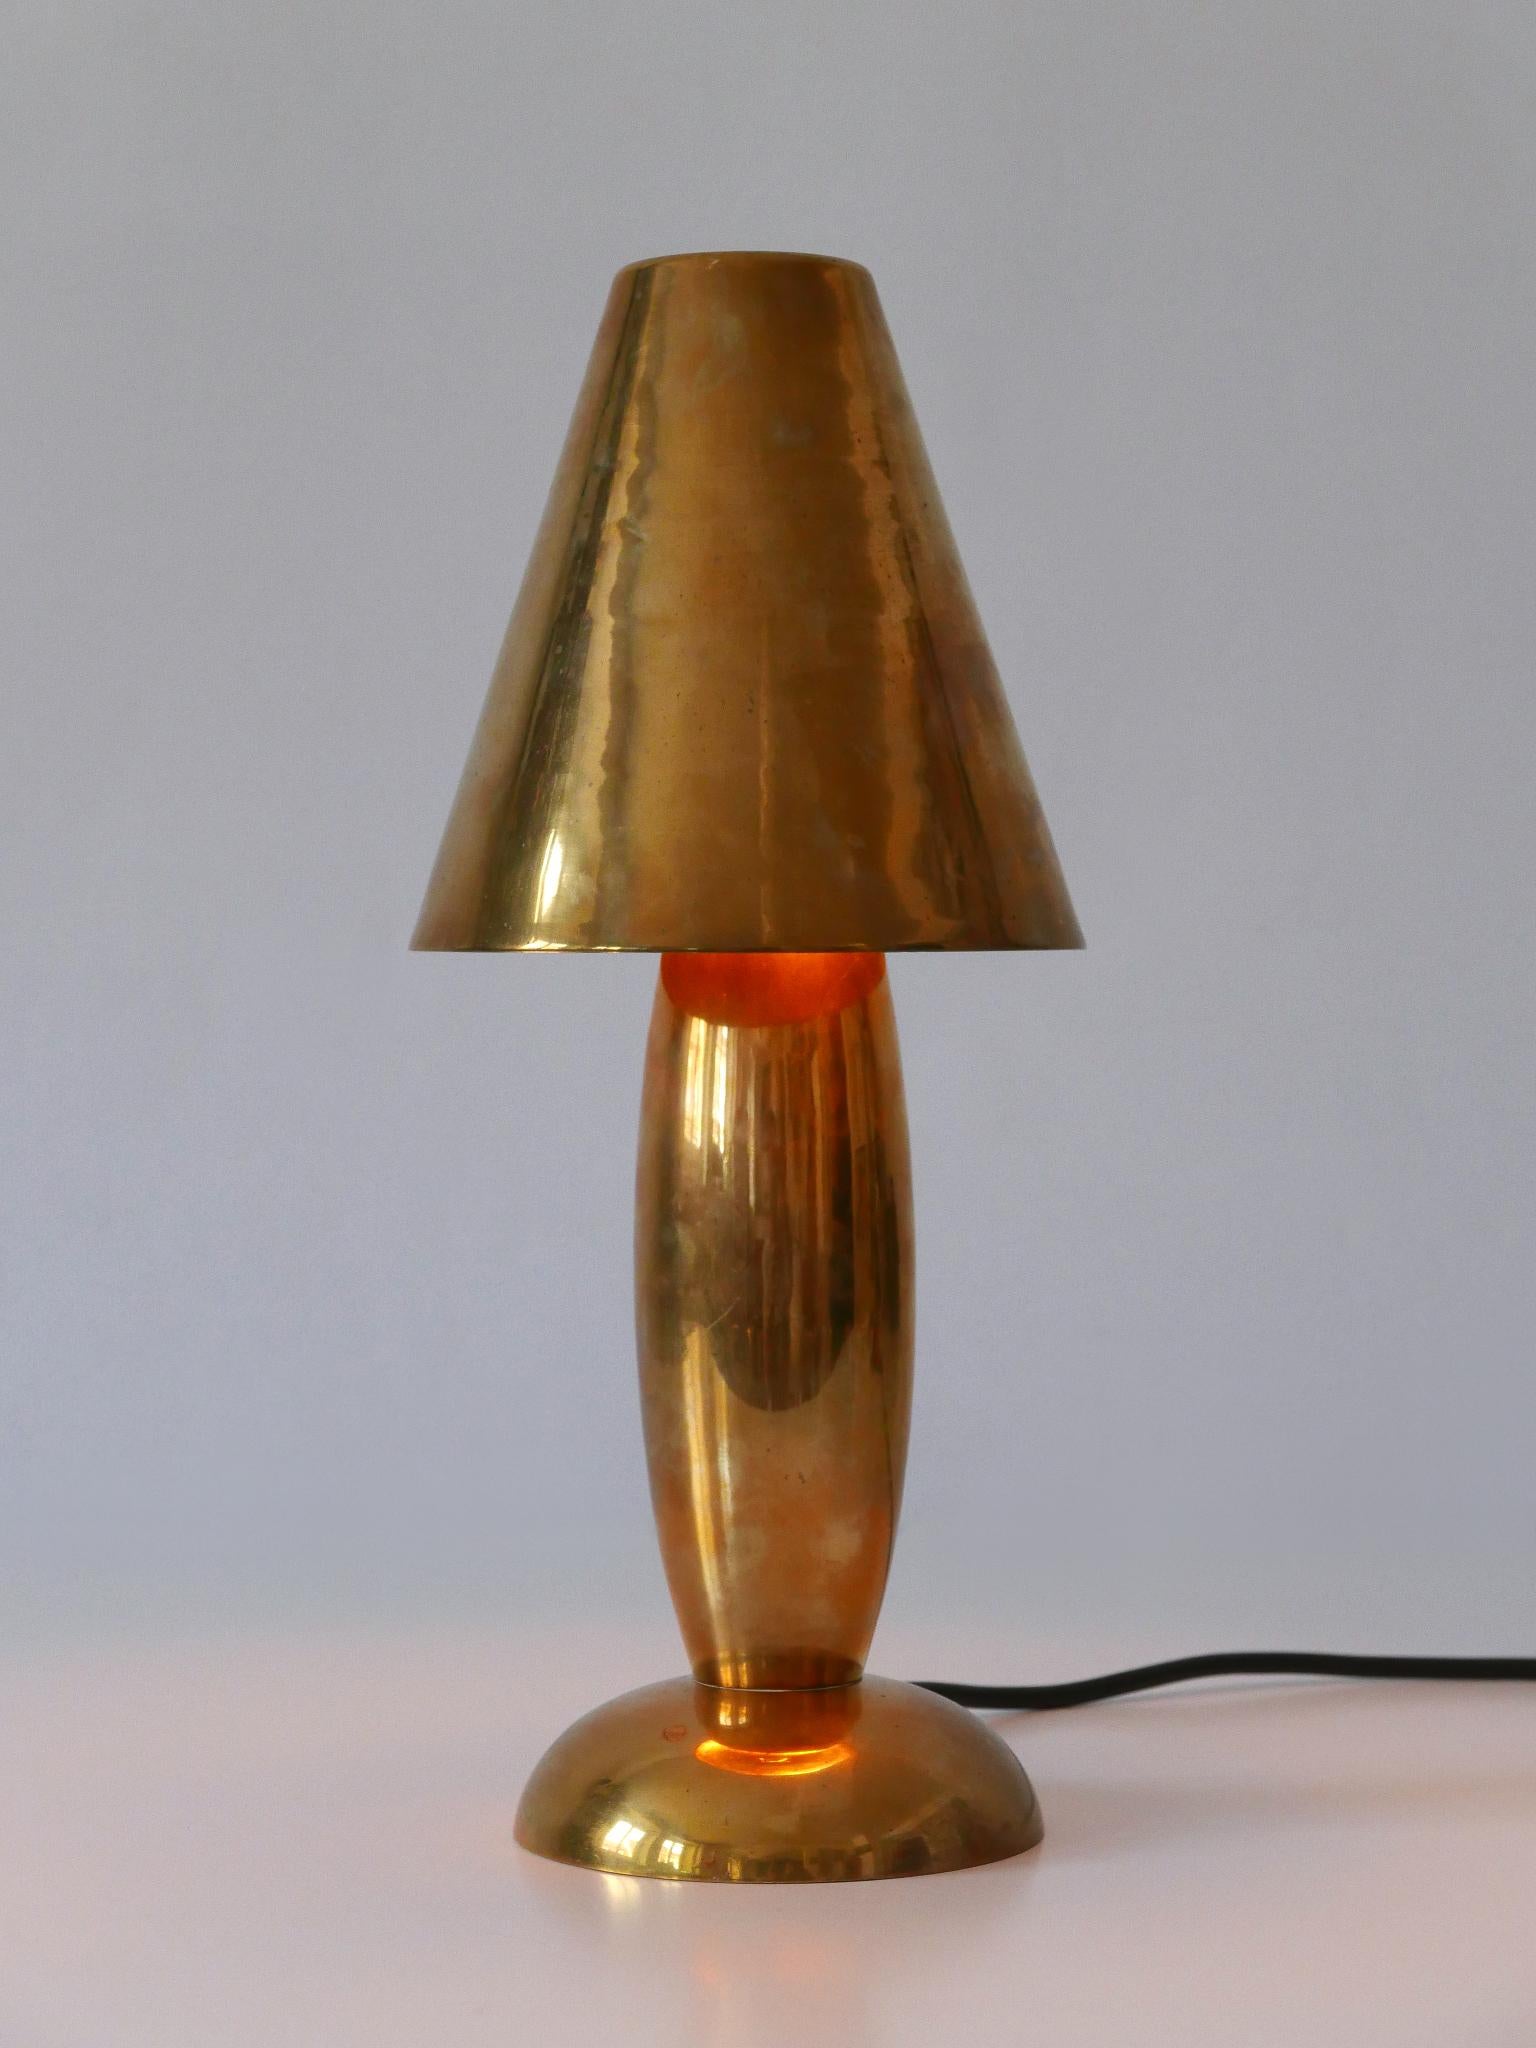 Late 20th Century Rare & Lovely Mid-Century Modern Brass Side Table Lamp by Lambert Germany 1970s For Sale